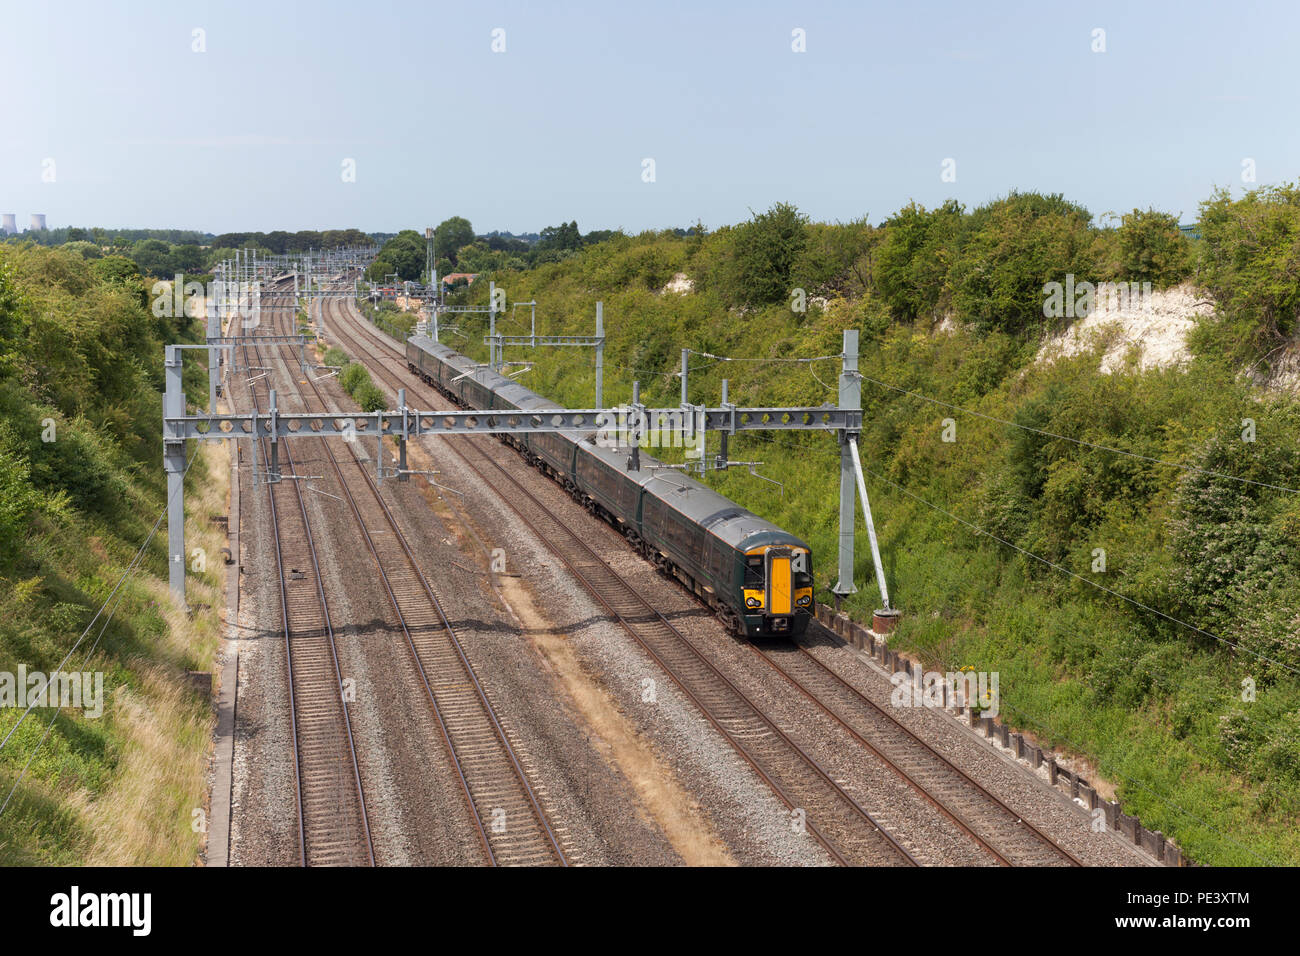 A First Great Western Railway class 387 electric commuter train passing Cholsey on the electrified great western main line Stock Photo